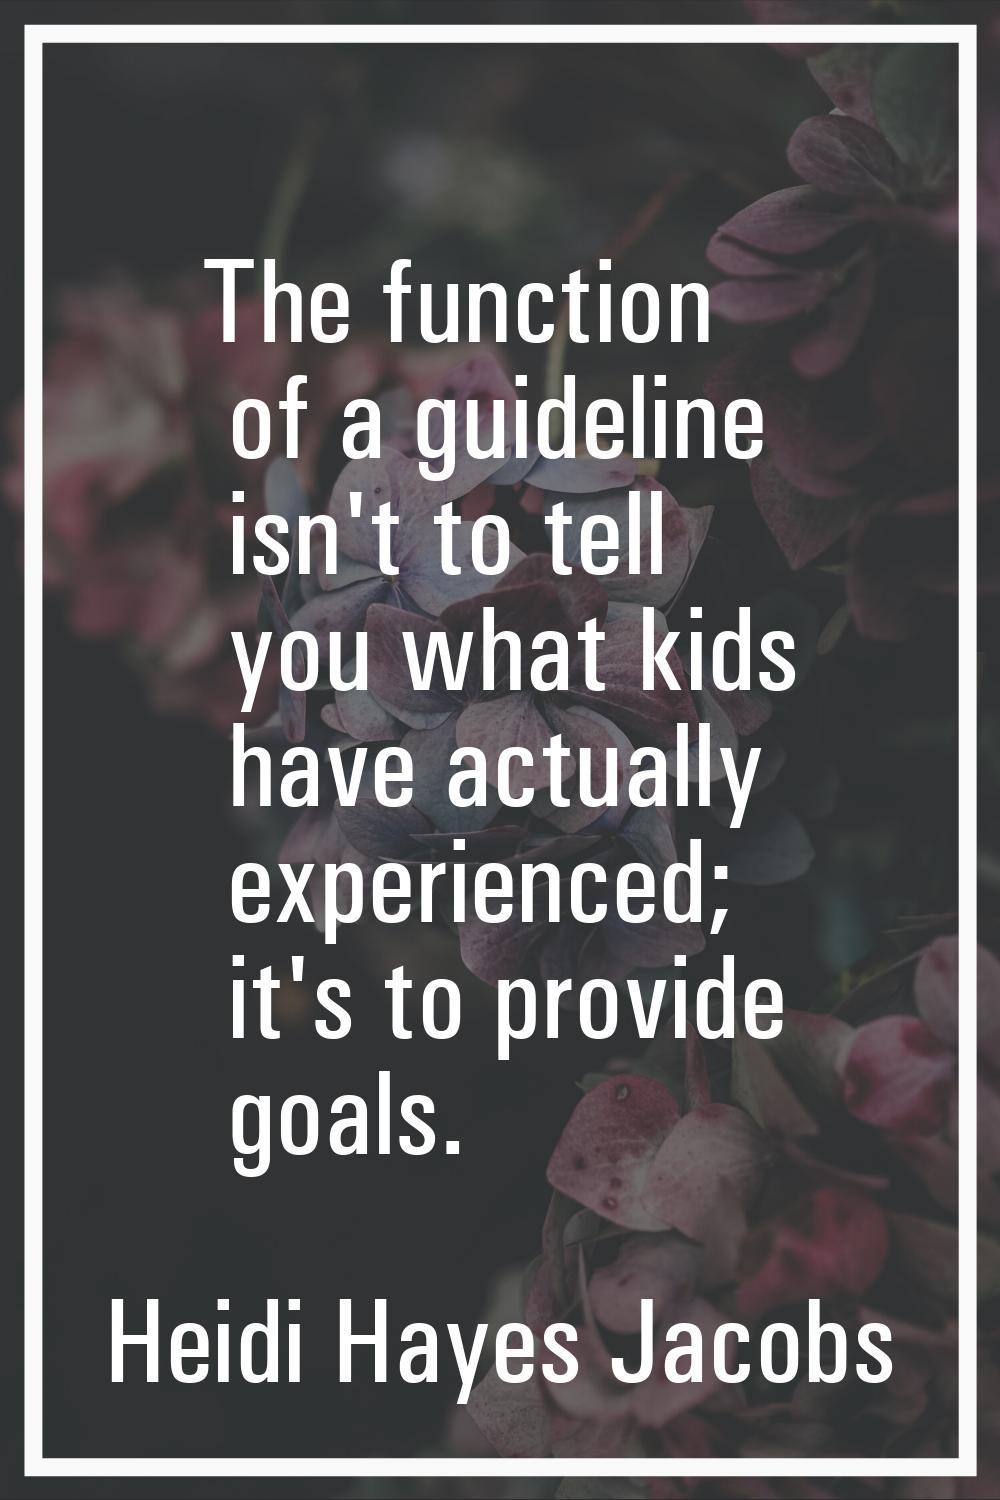 The function of a guideline isn't to tell you what kids have actually experienced; it's to provide 